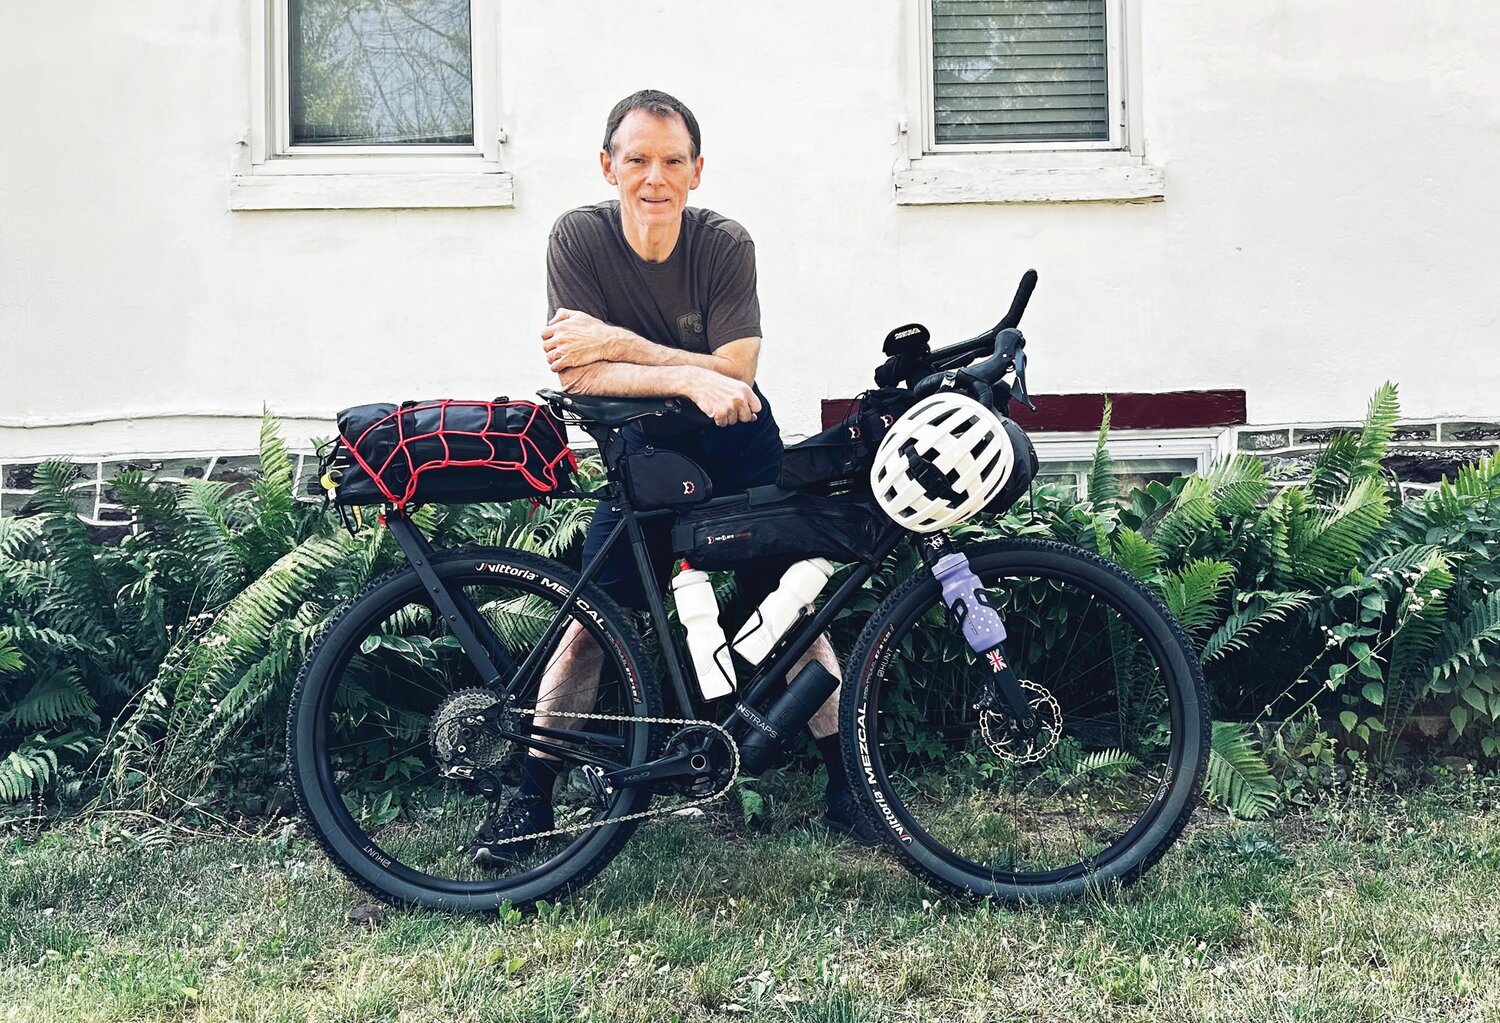 At the age of 62, Boing Gymnastics owner Mark Gibson is about to tackle the Tour Divide, a bike ride from Canada to Mexico.